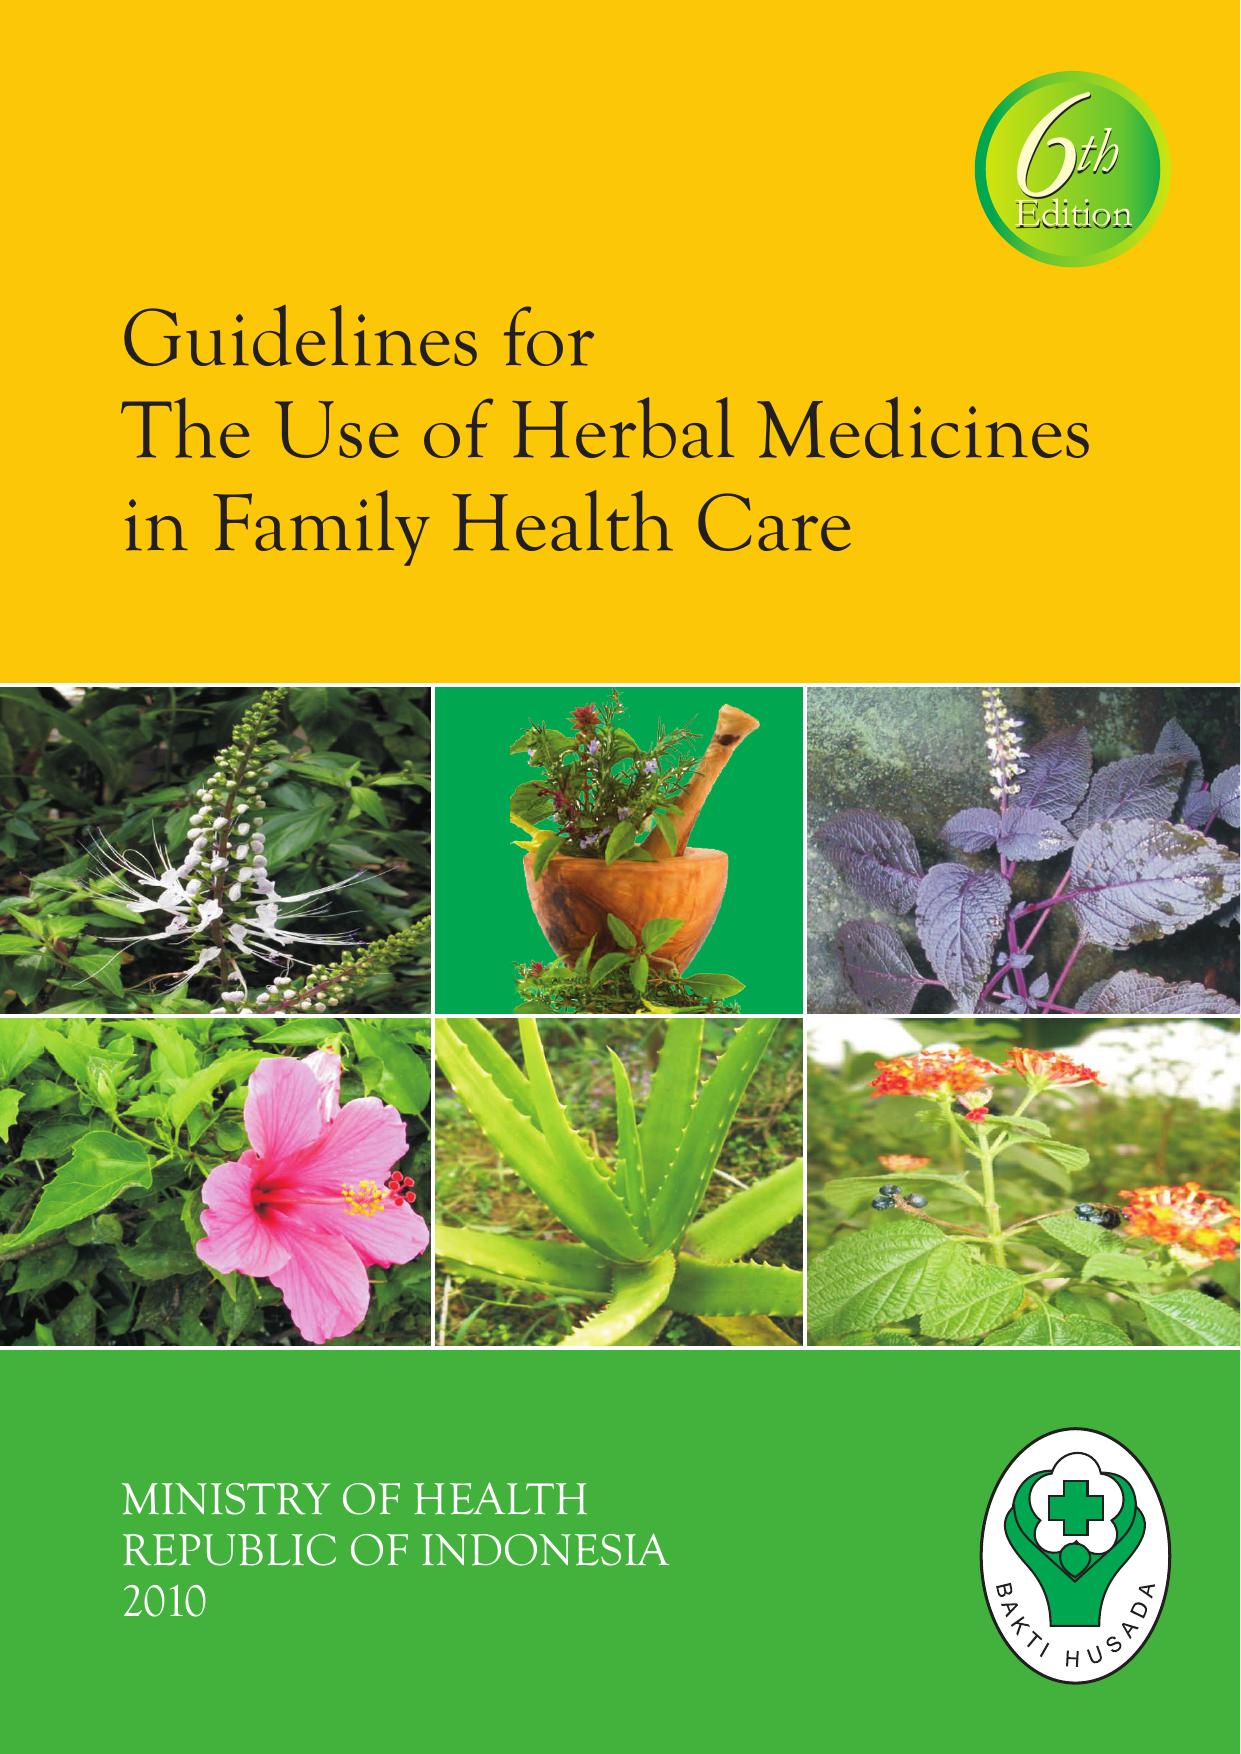 Guidelines for the use of herbal medicine ministry of health 6th ed 2010